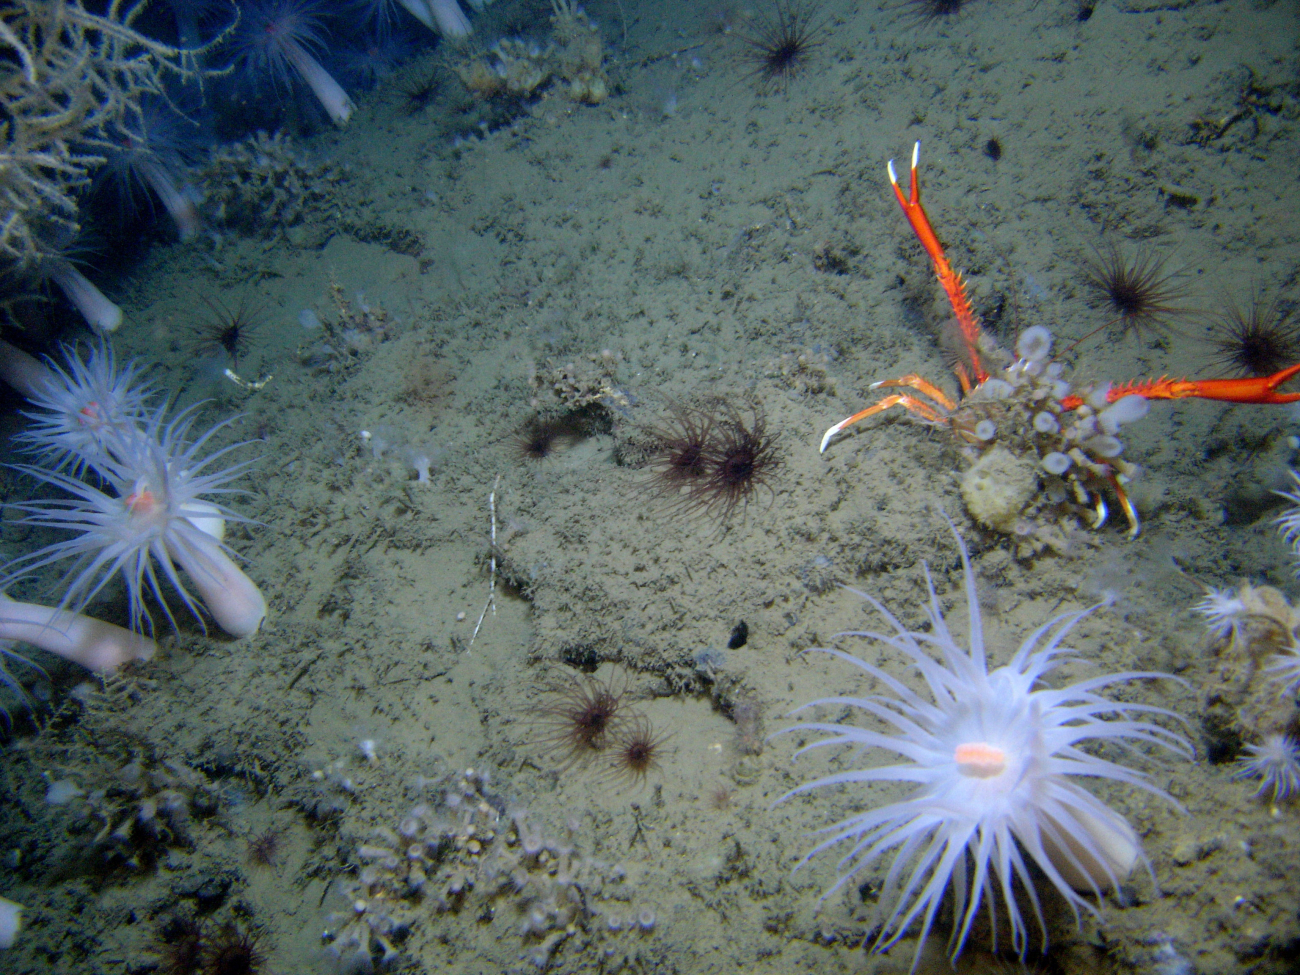 Large white anemones with orange mouth, brown cerianthid anemones, lollipopsponges, and a large orange and white squat lobster with chelae extended